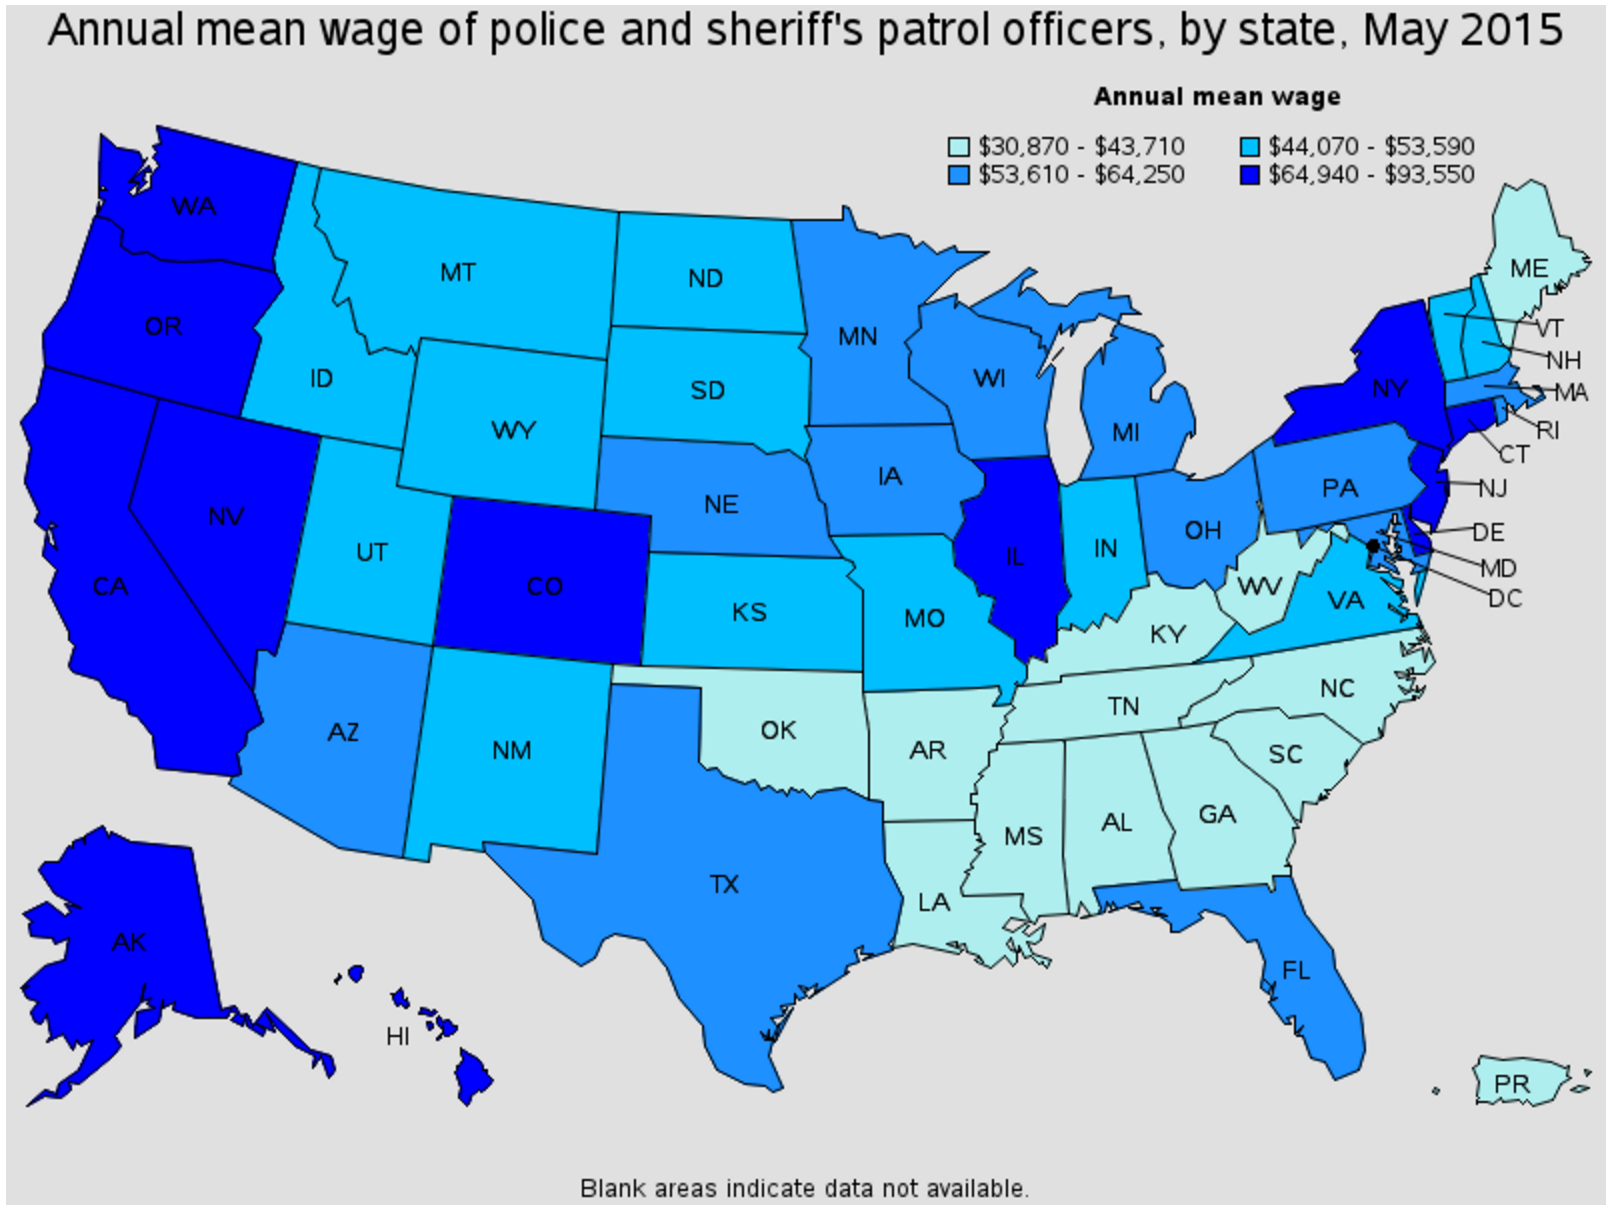 Lamont police officer average salary by state